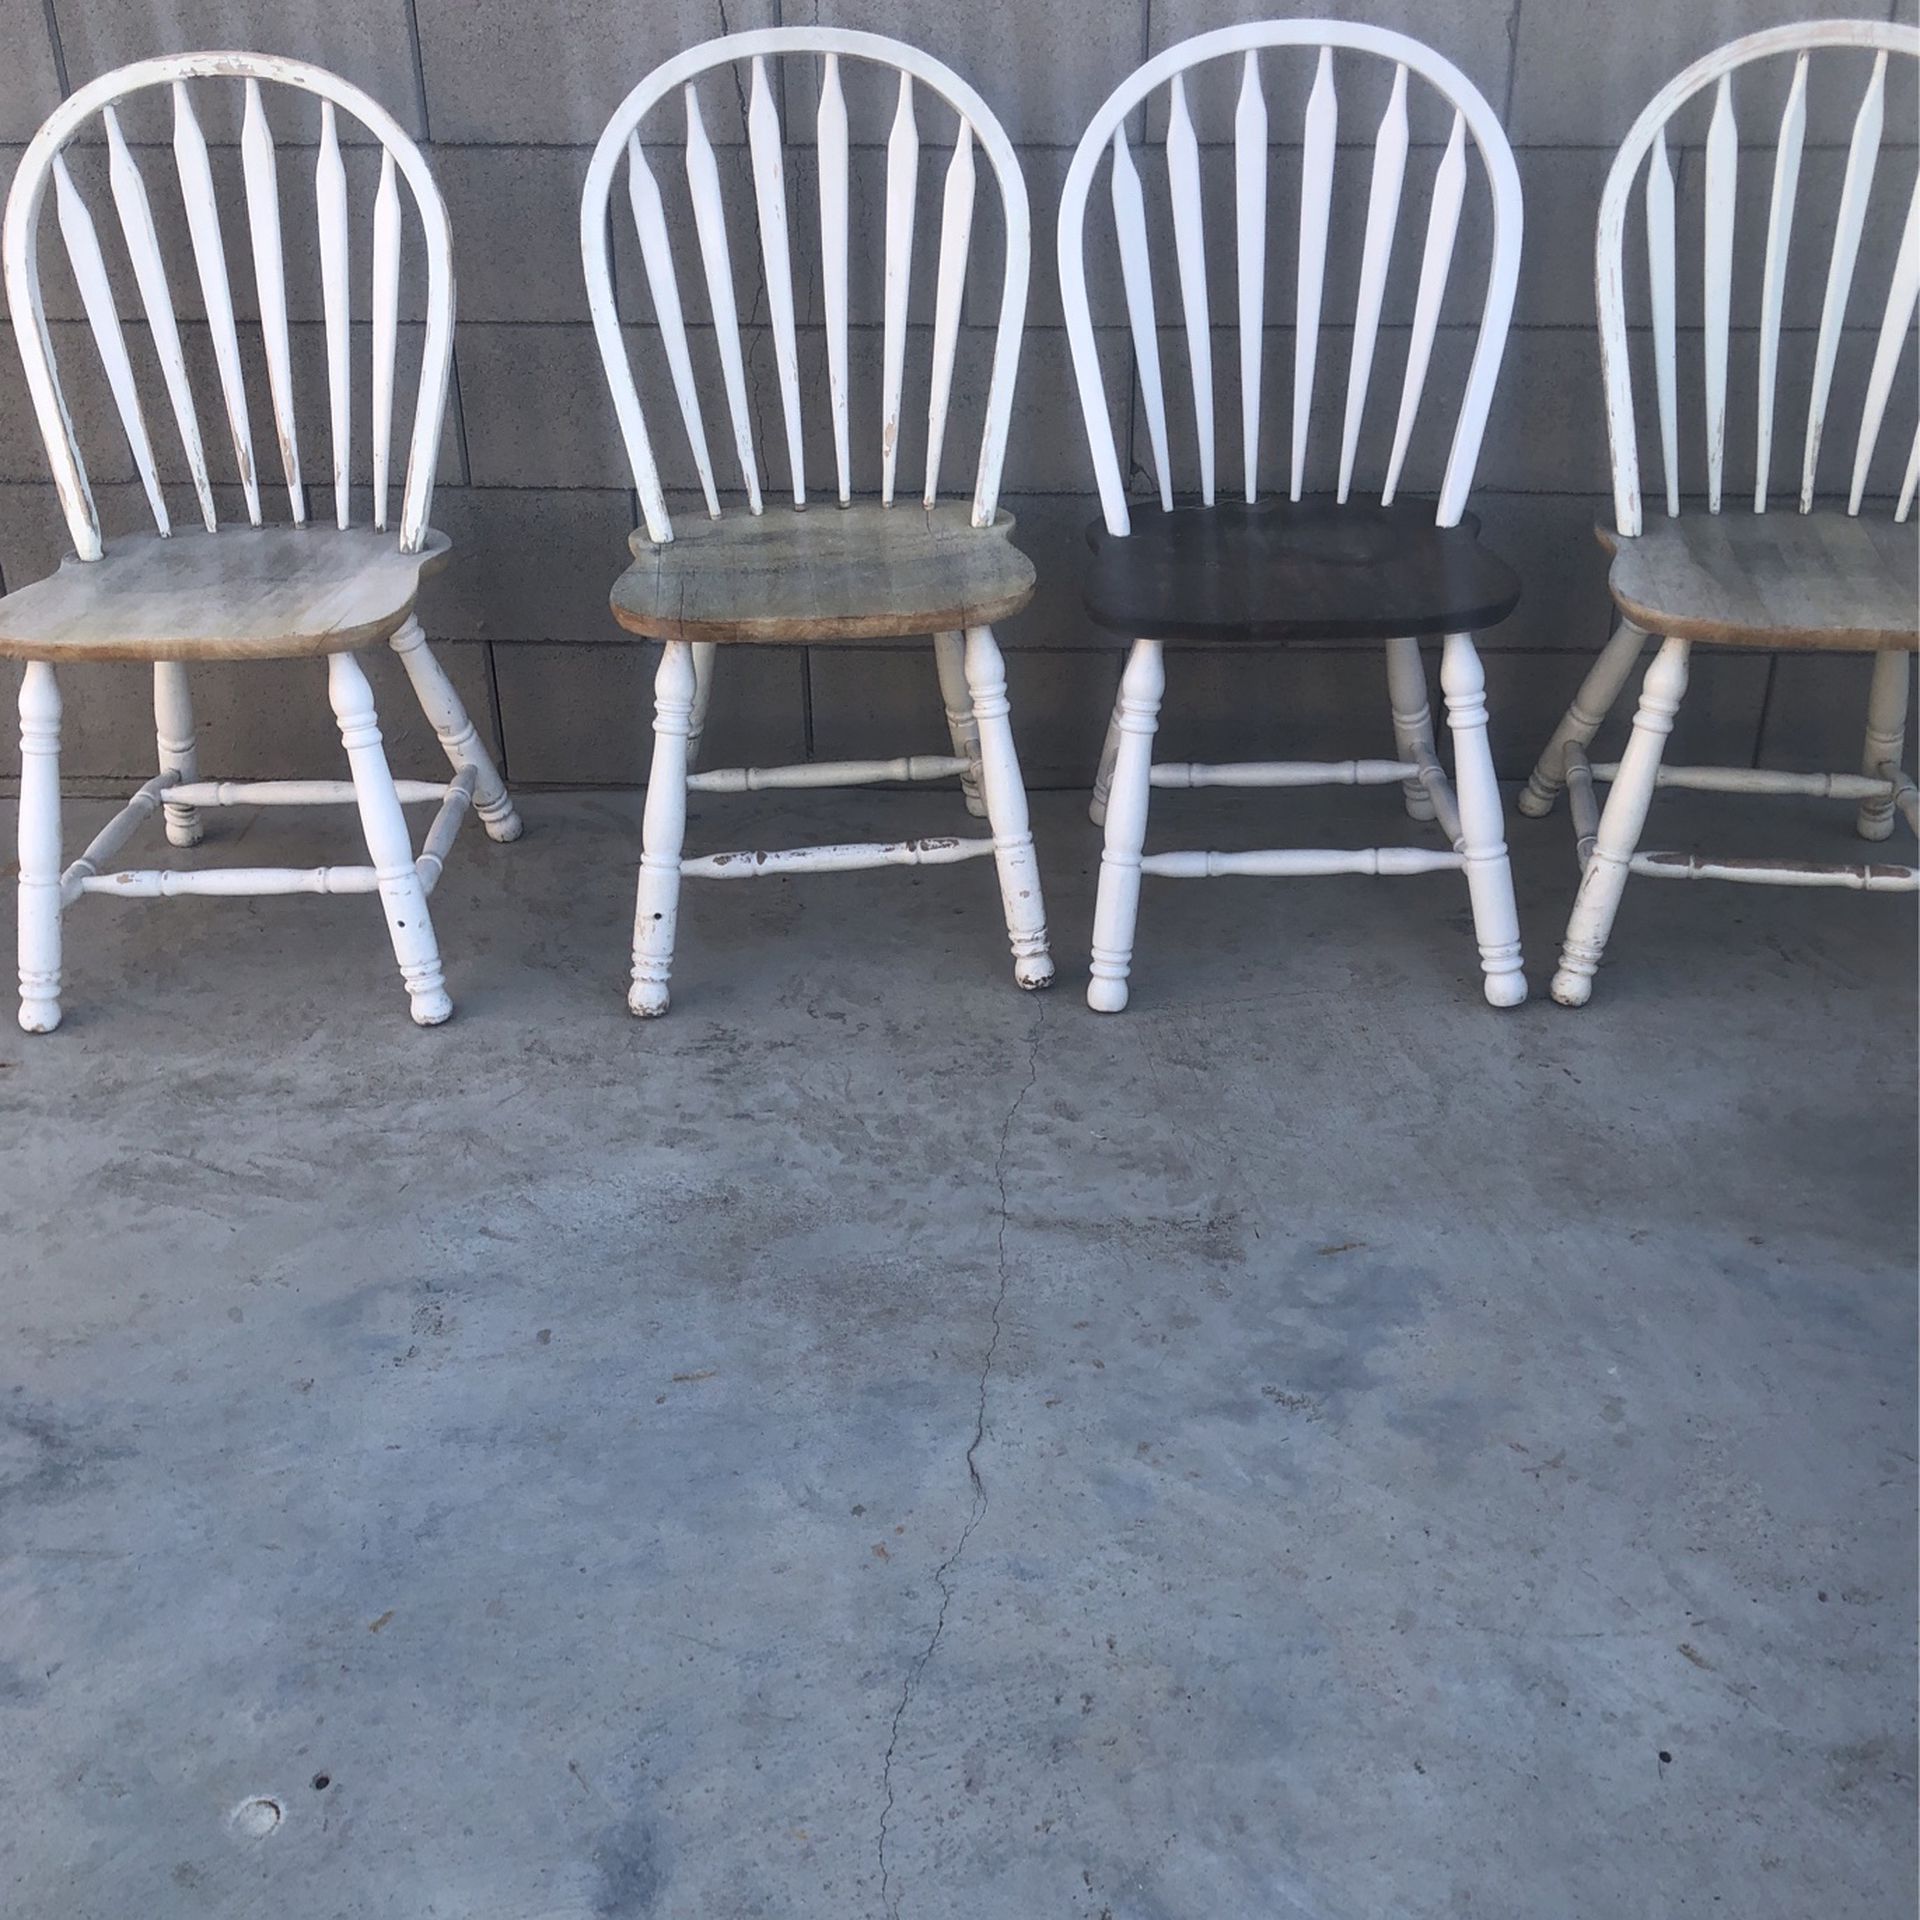 Free Chairs